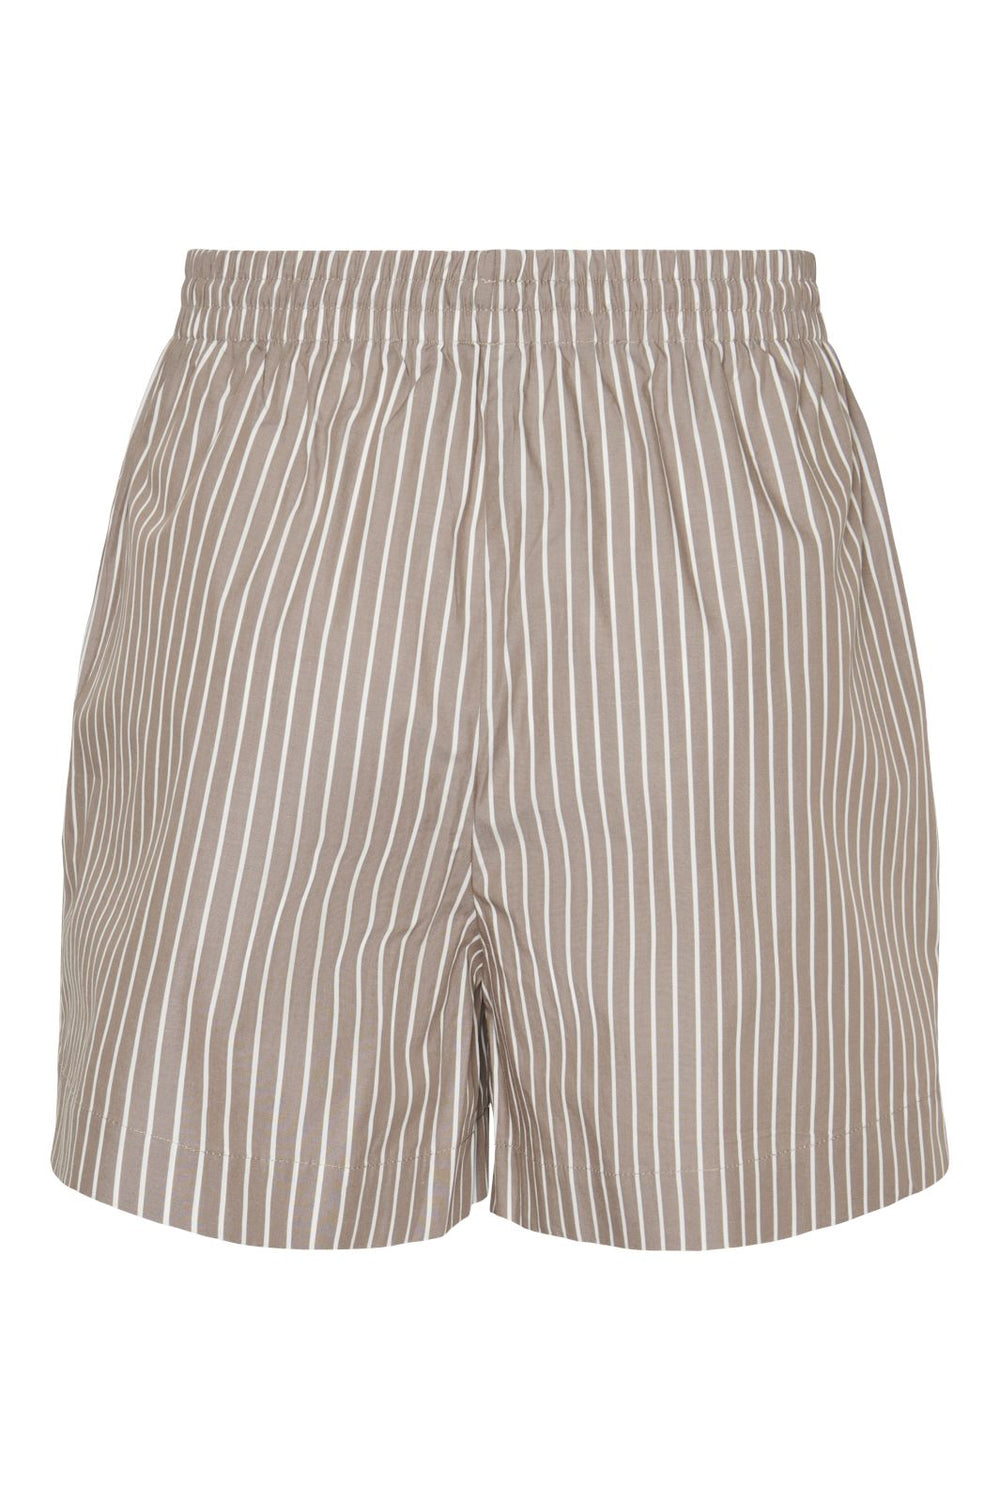 Pieces - Pcpenny Shorts Camp Mm - 4586945 Fossil Bright White